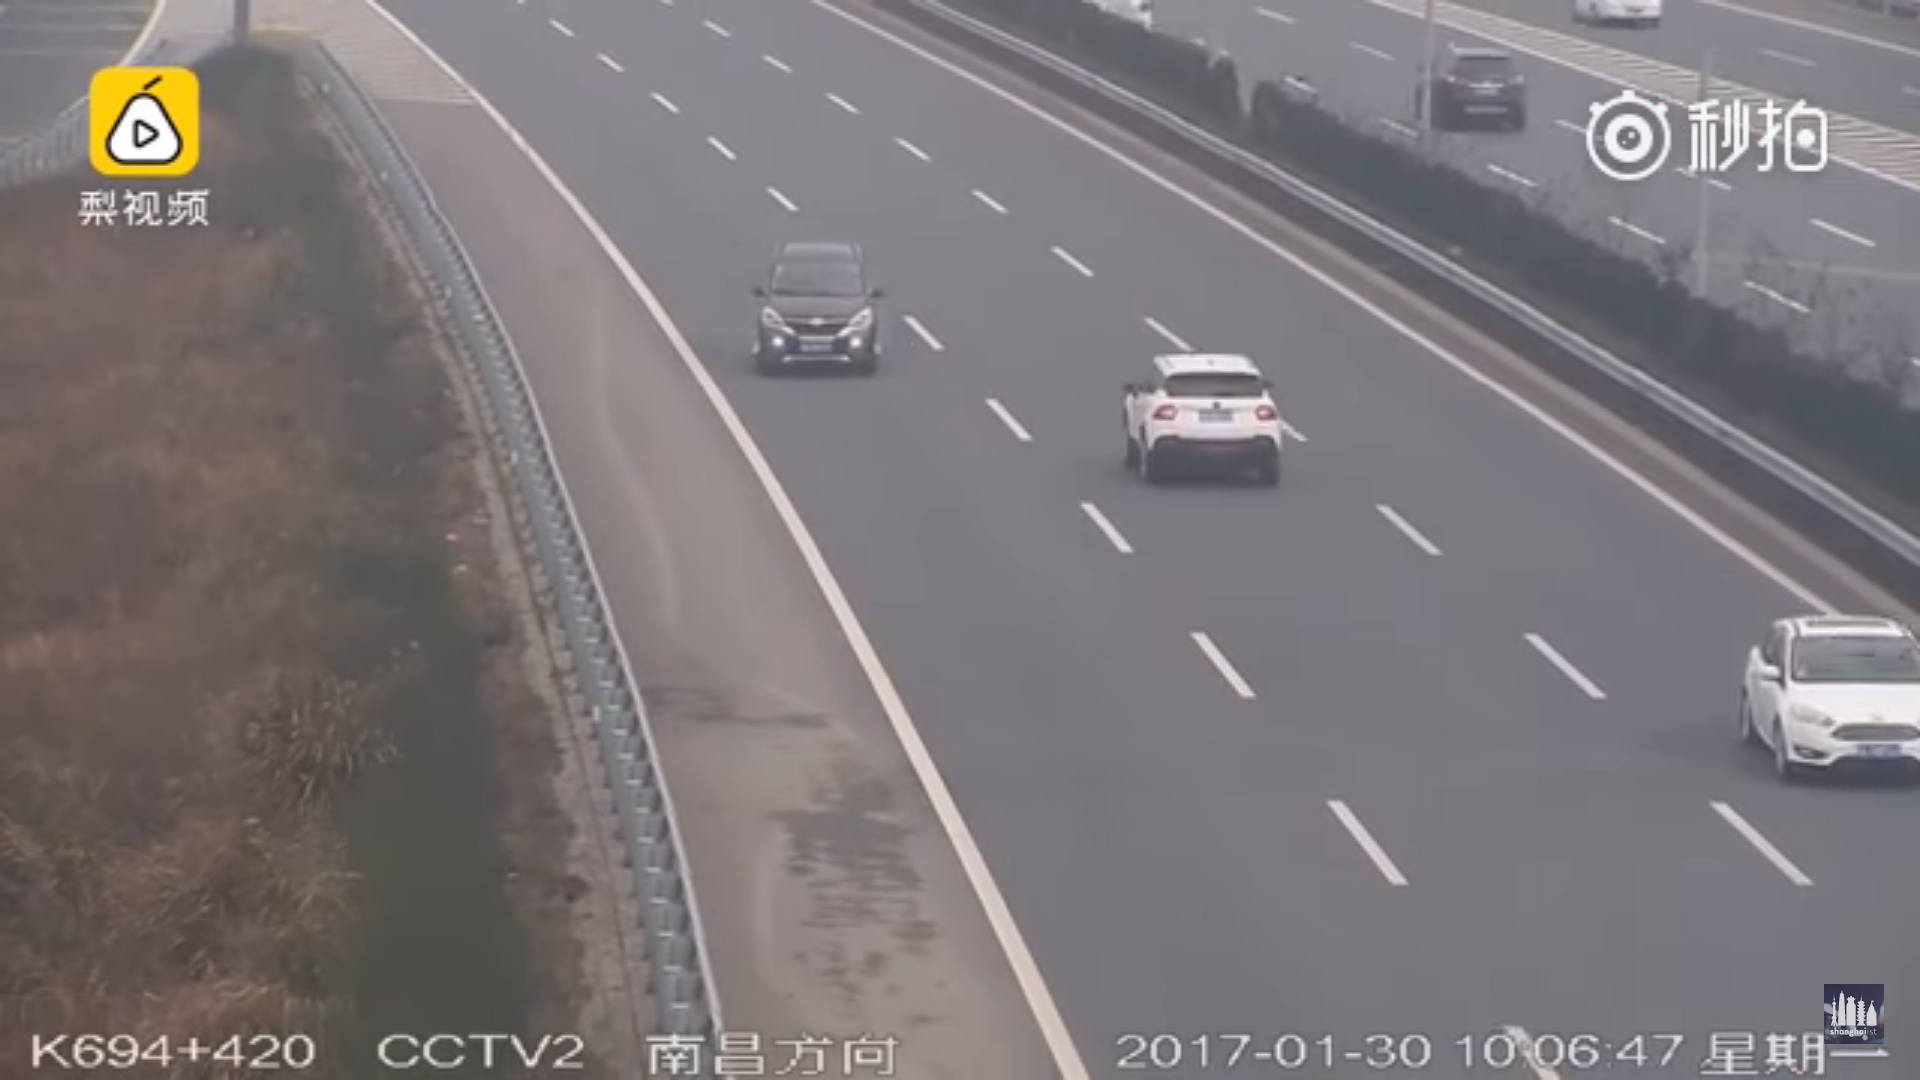 Chinese Drove On The Wrong Side Without Knowing It's Illegal - World Of Buzz